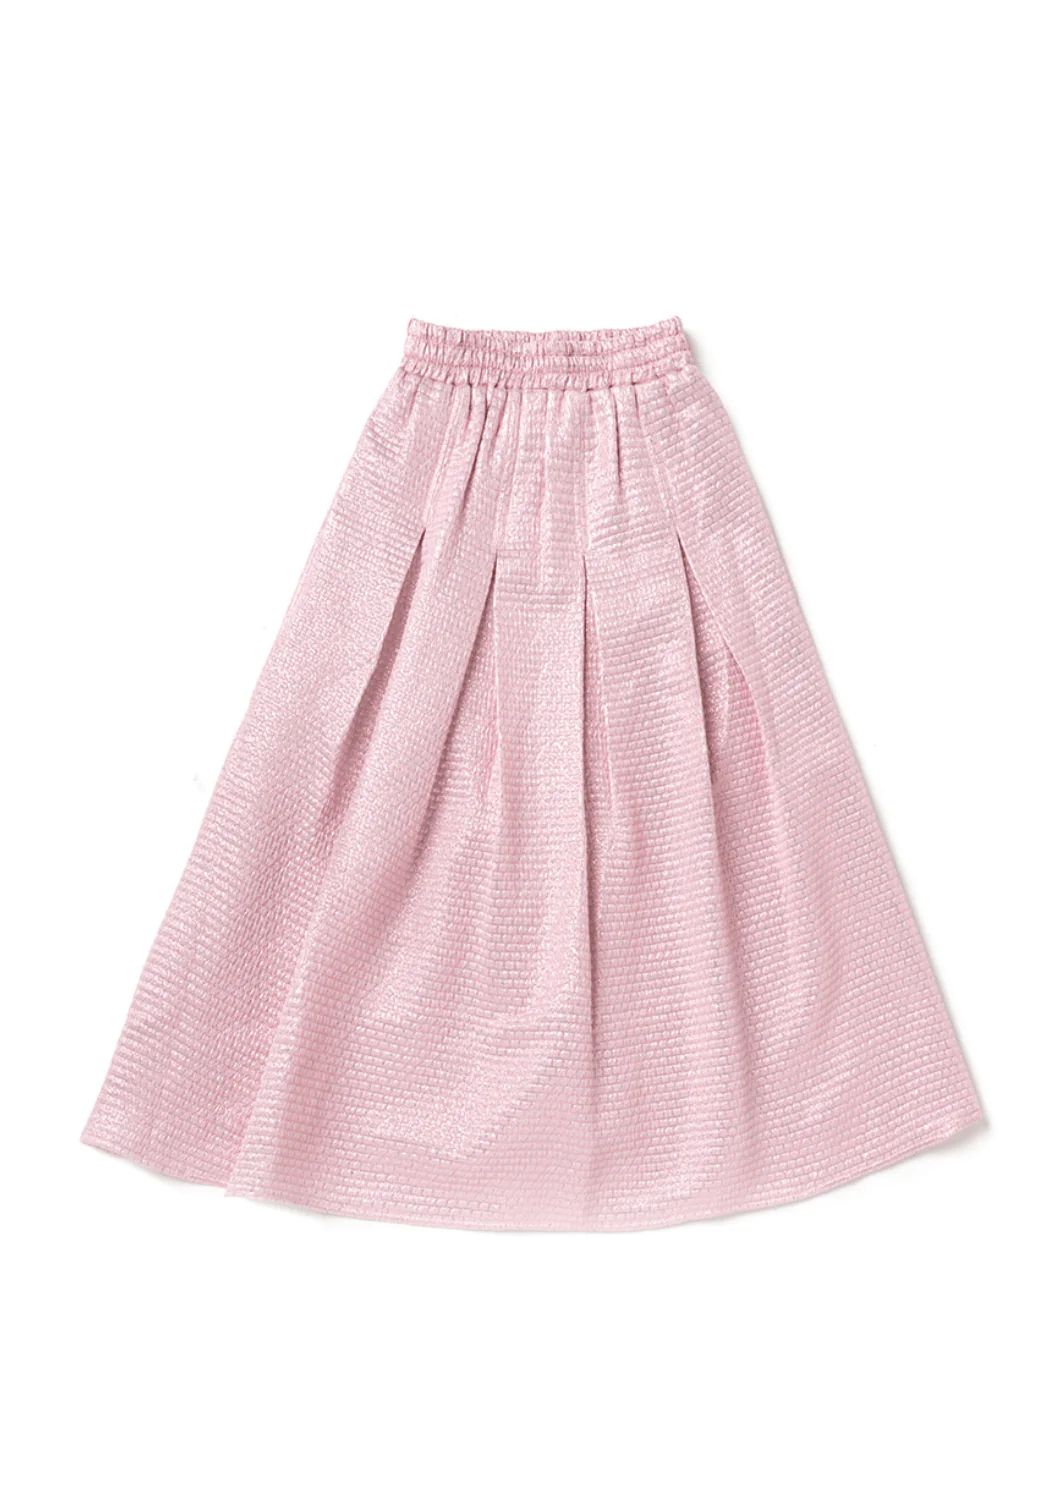 Polly Party Skirt - Pink Quilted | Shop BURU